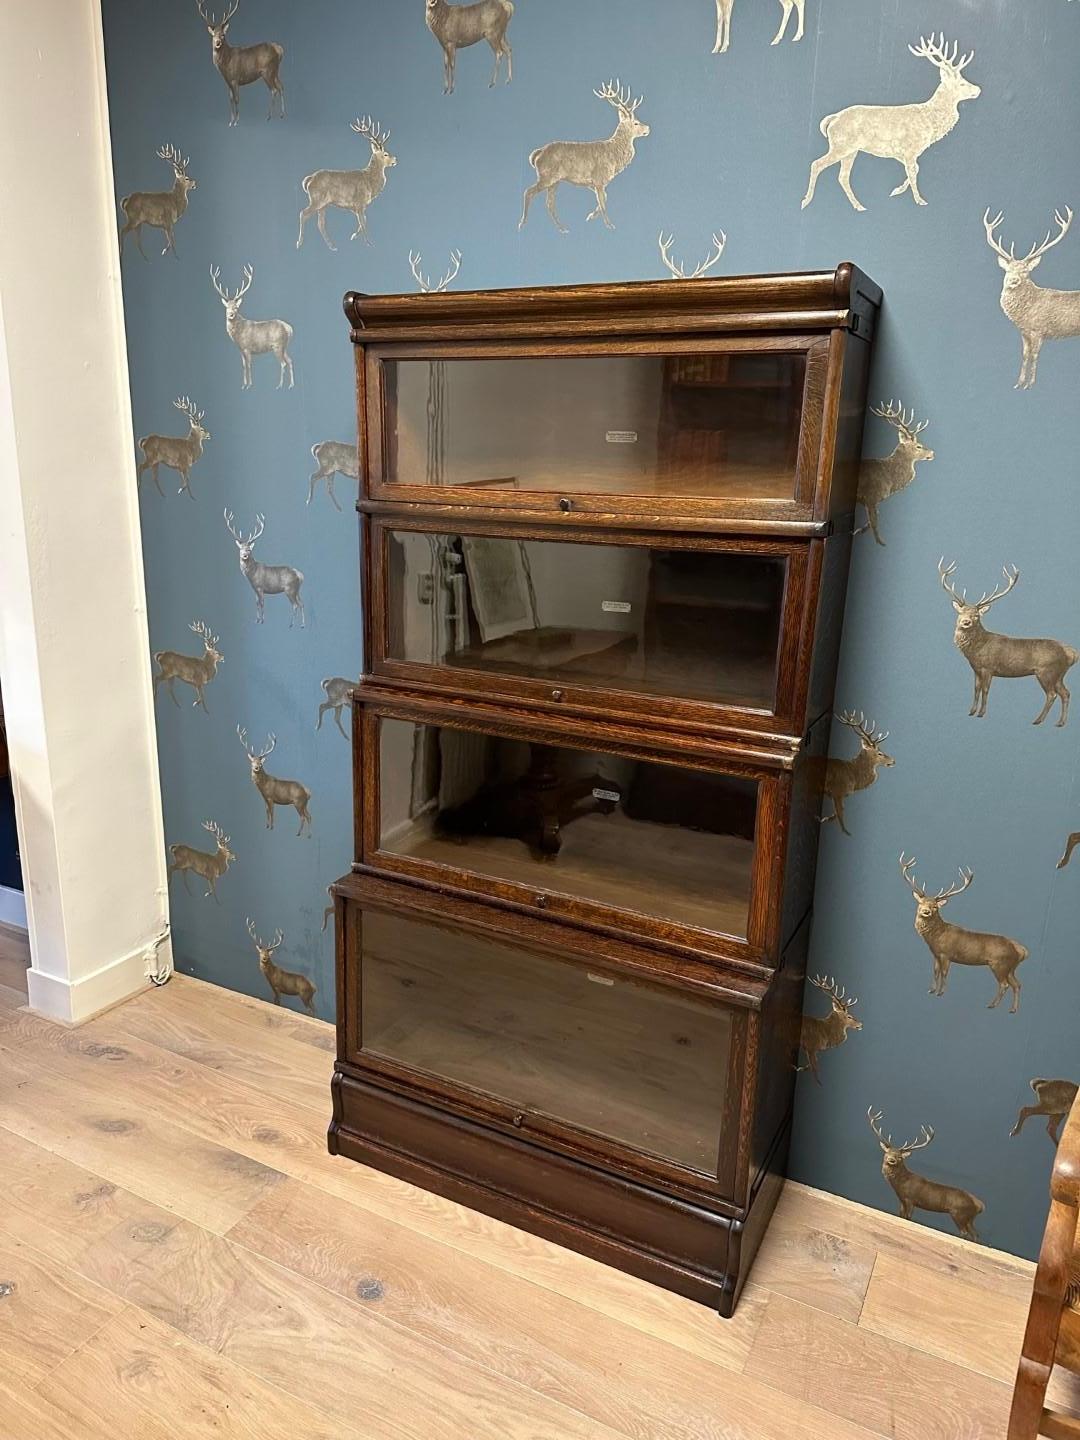 Antique Globe Wernicke bookcase in good condition. The cupboard consists of 4 stackable parts with 3 different depths. This is called a waterfall setup.
Origin: England
Period: Approx. 1900
Size: 86.5cm x 35cm x h. 169cm